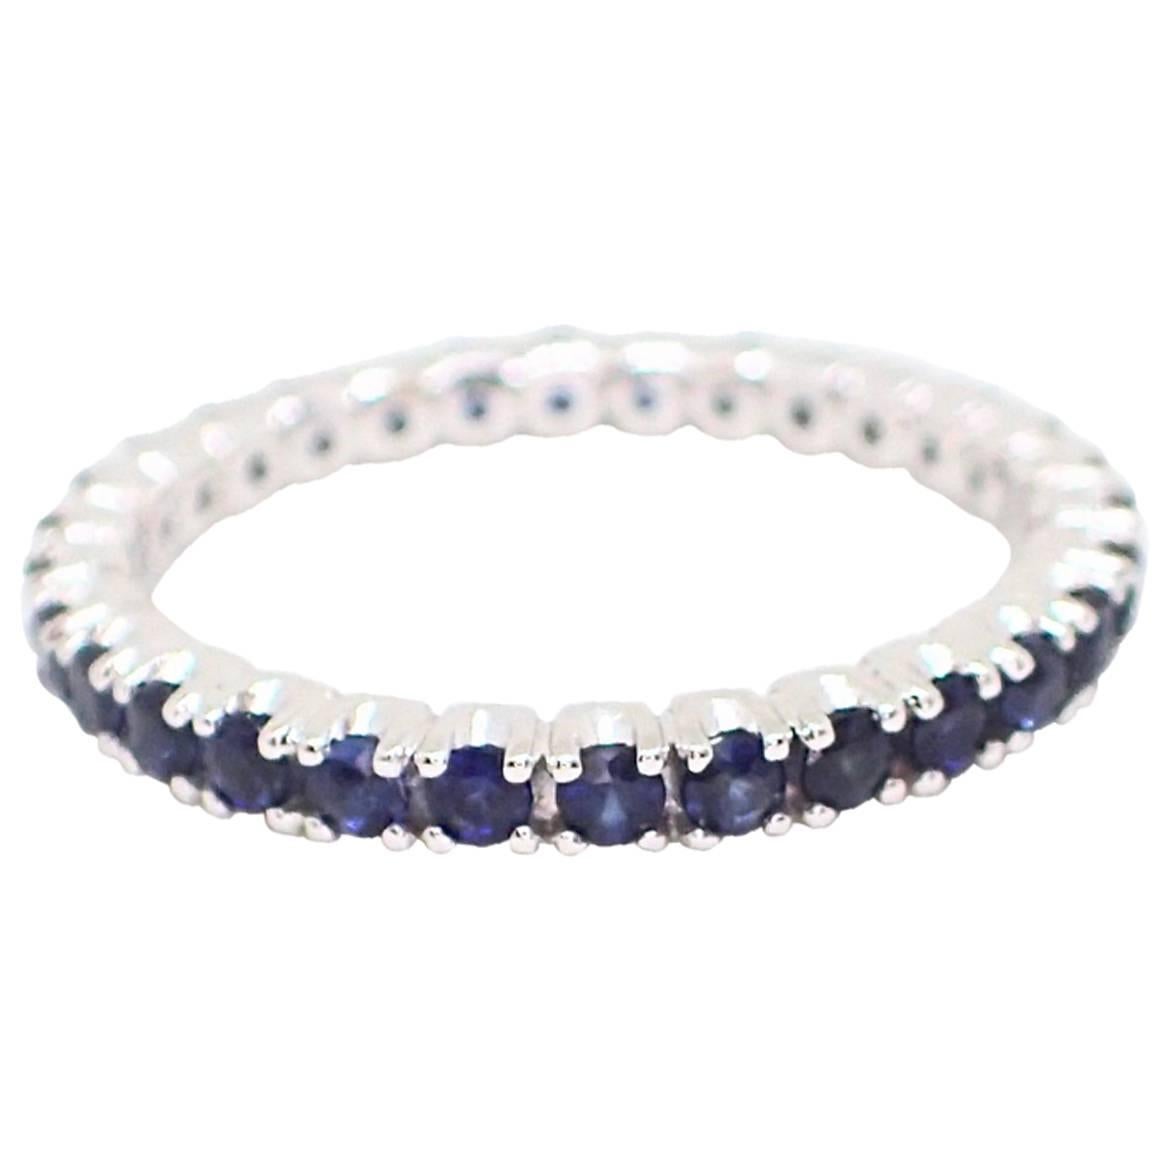 18 Karat White Gold Eternity Band with 1.02 Carat of Sapphire